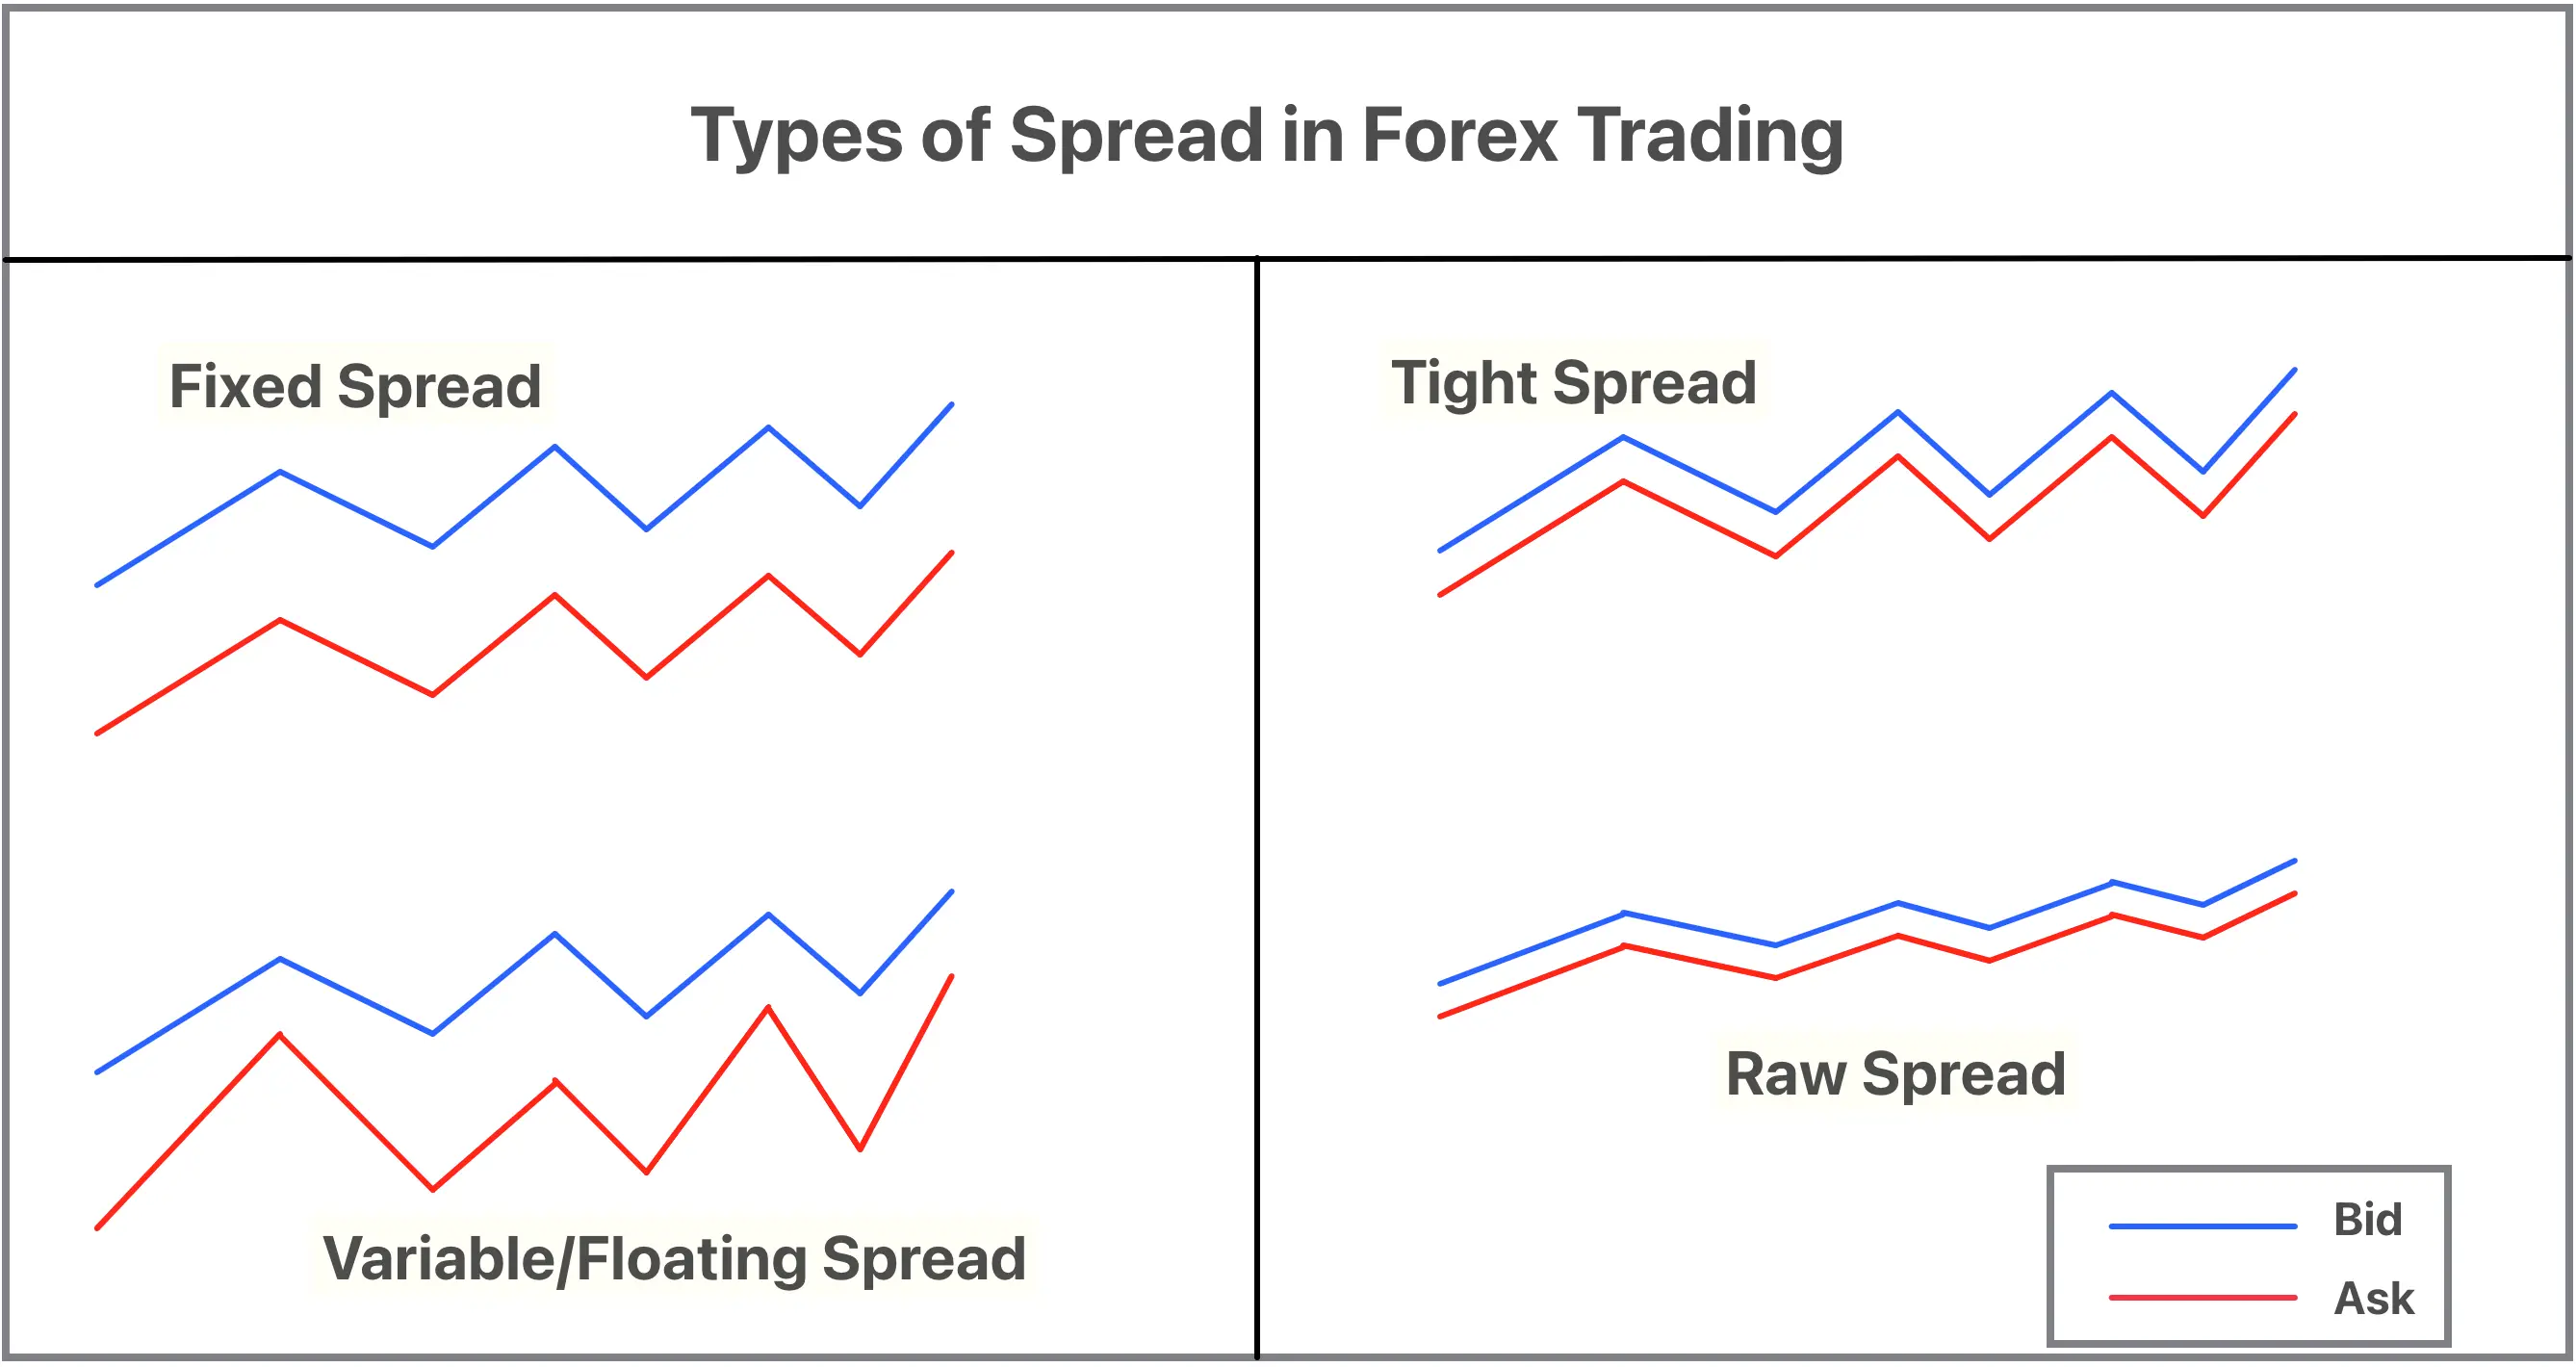 What is spread in forex trading